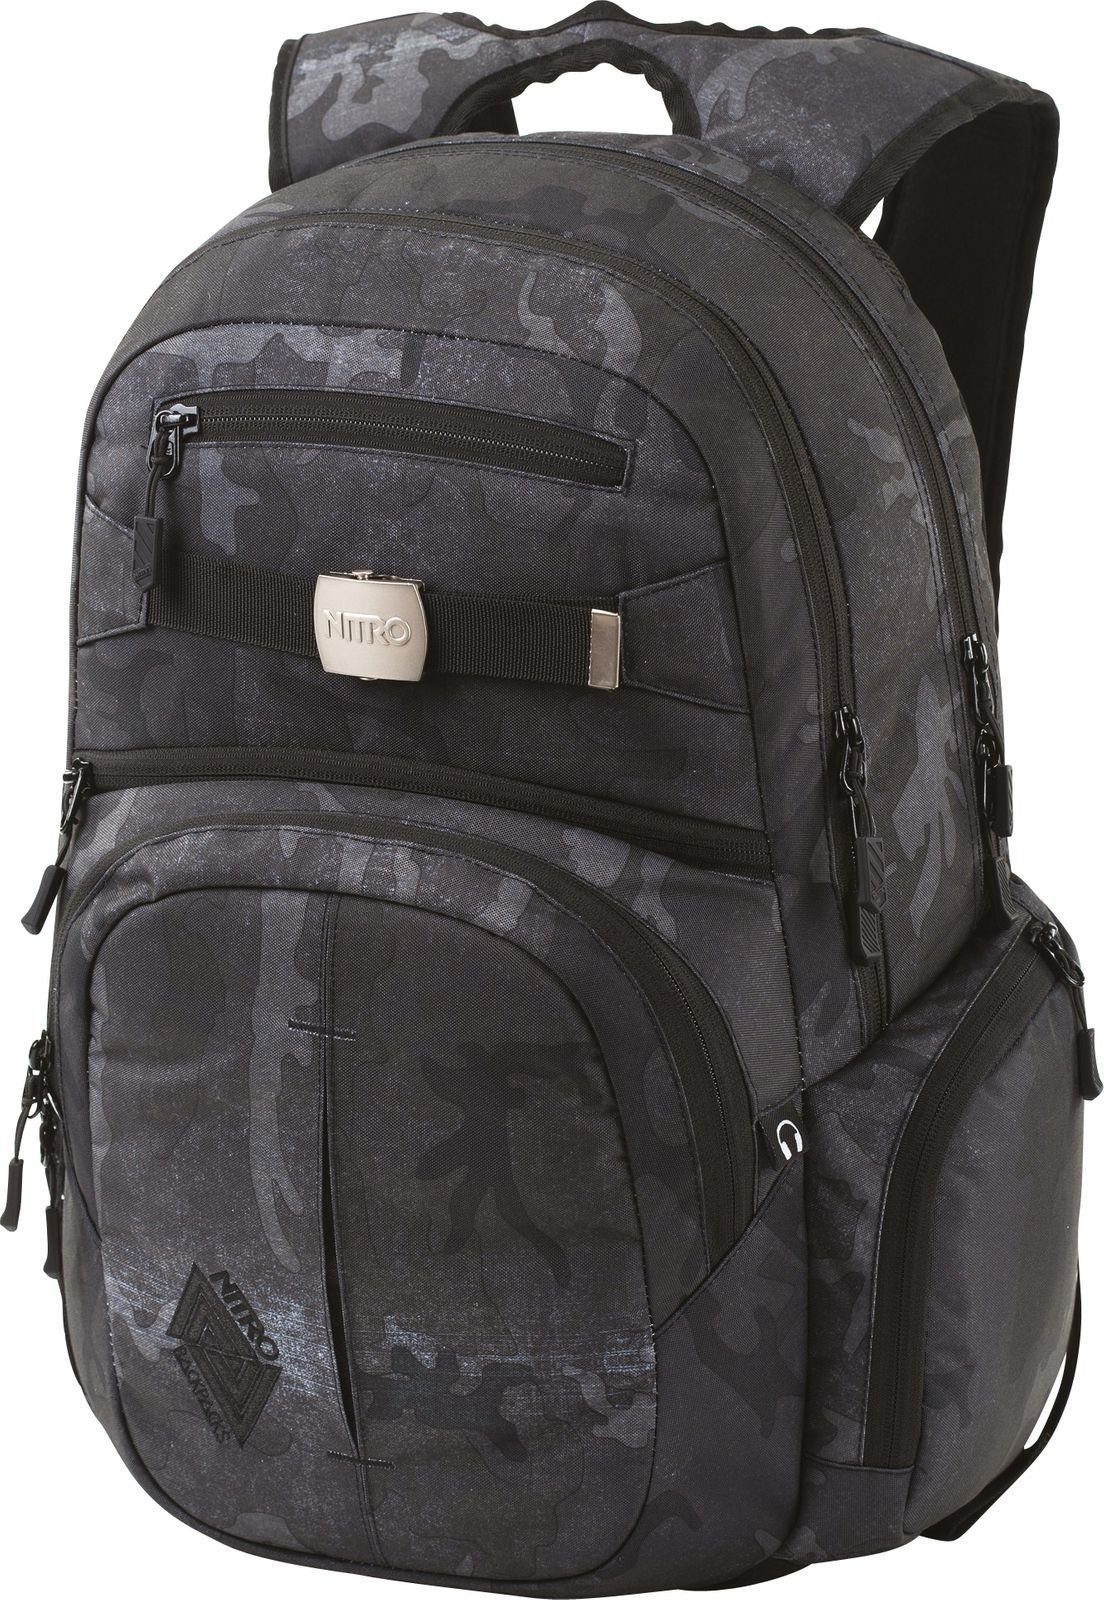 NITRO Rucksack Daypacker Collection Forged Camo